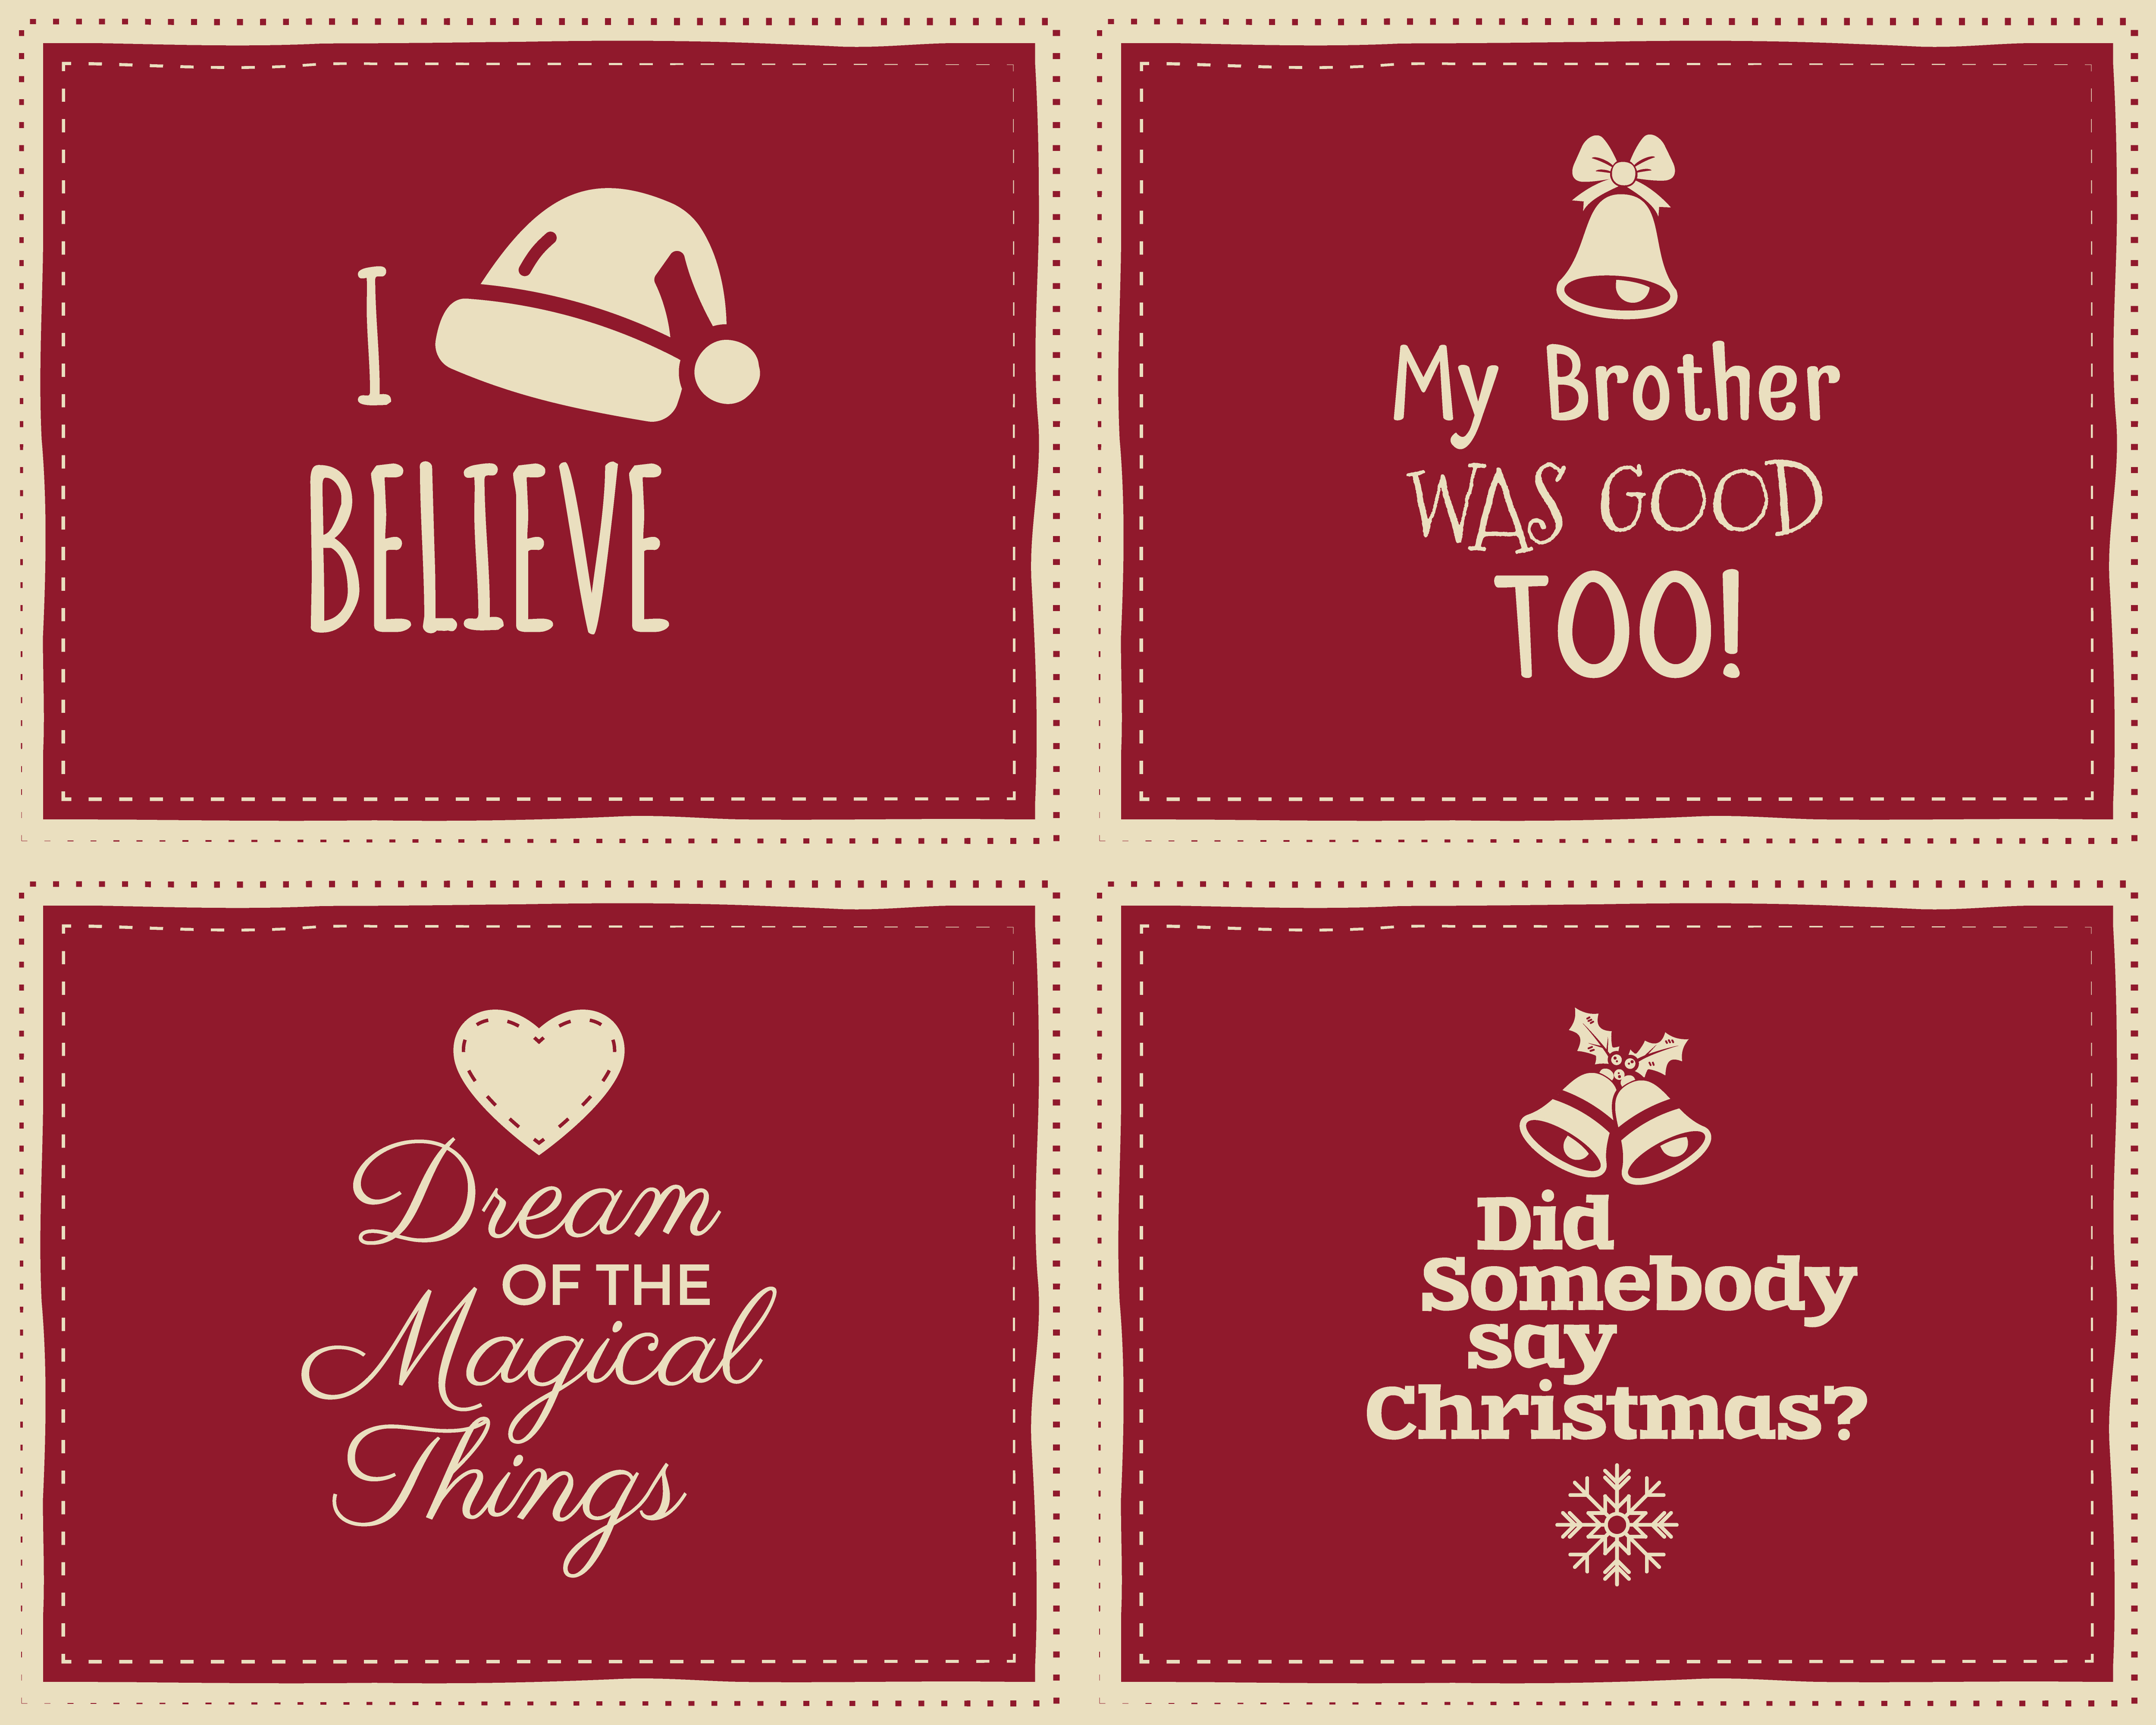 Set of Christmas funny signs, quotes backgrounds designs for kids - i  believe in santa claus. Nice retro palette. Red and white colors. Can be  use as flyer, banner, poster, background card.